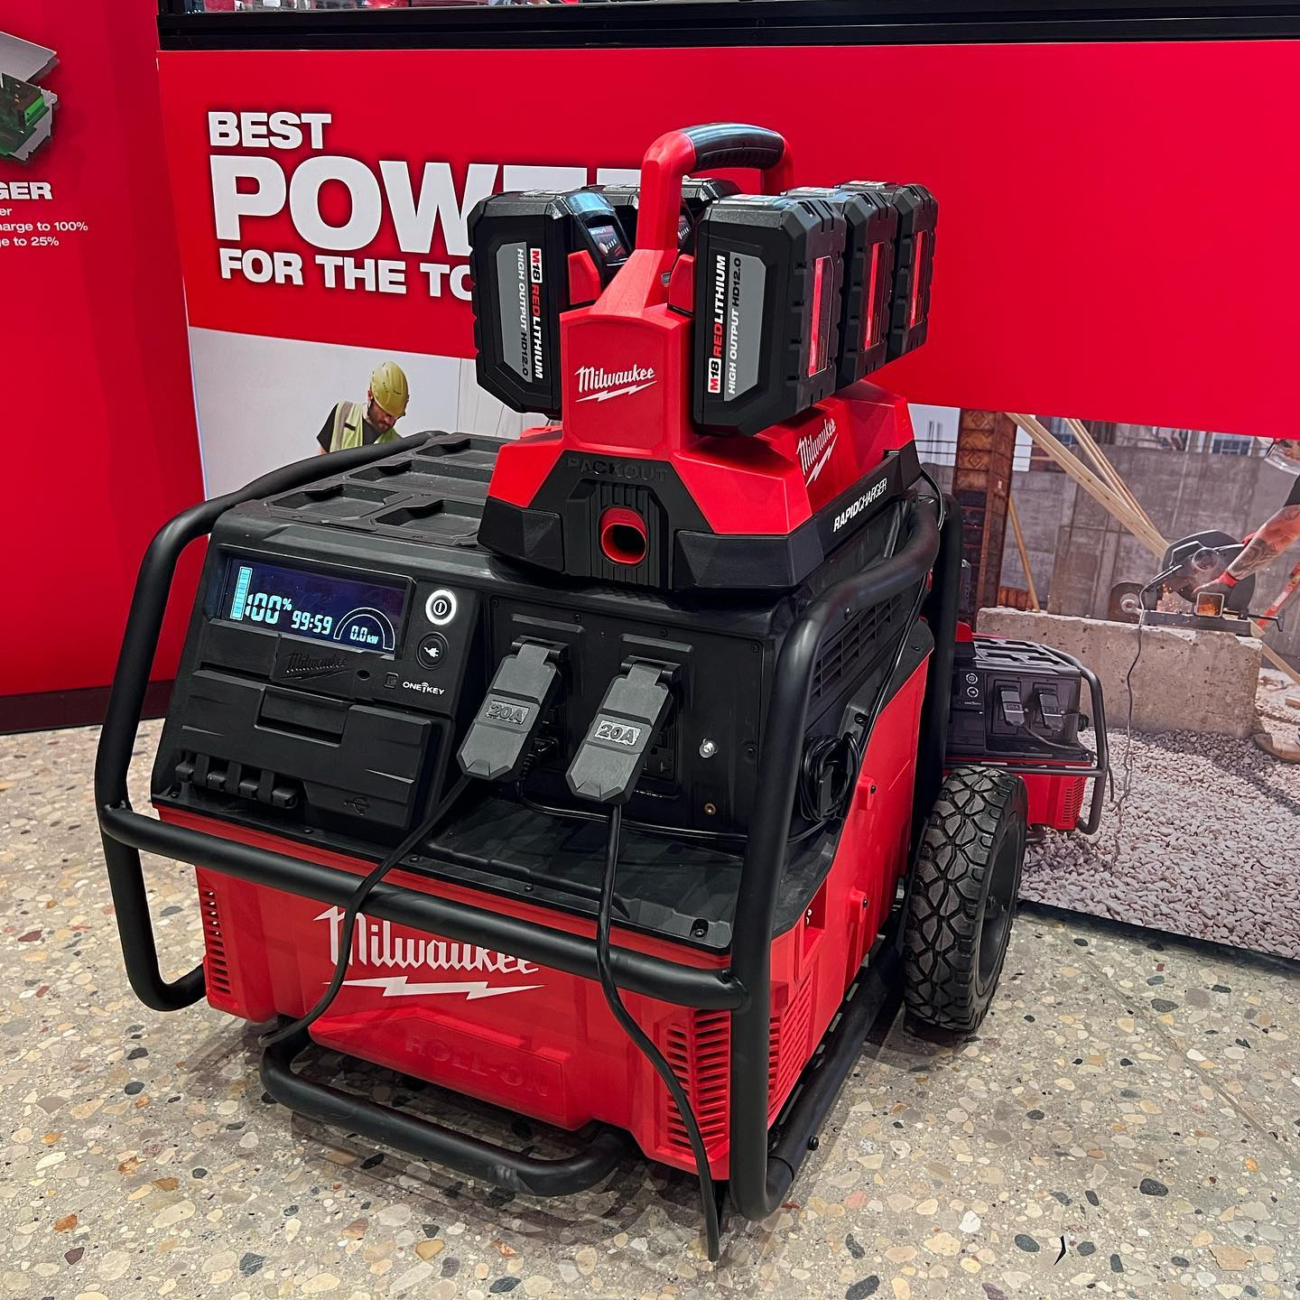 2023: Get Ready for the Next Generation of Milwaukee Power Tools!